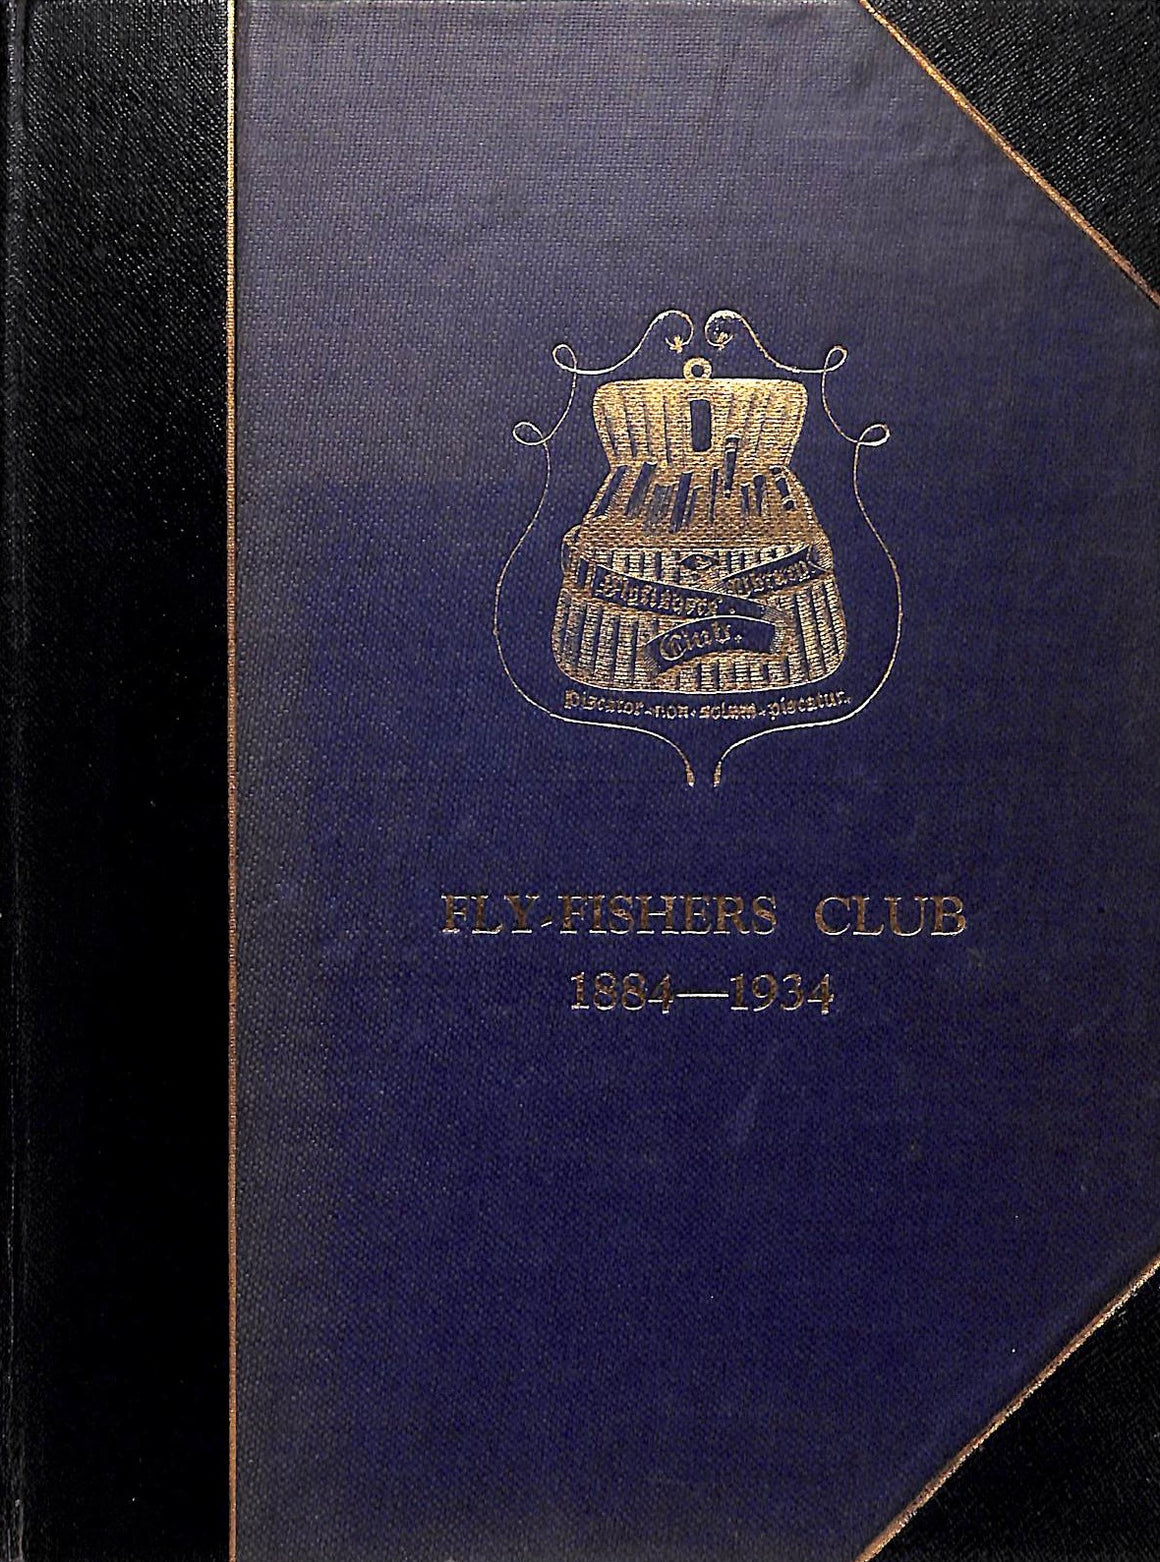 The Book of Fly-Fishers Club, 1884-1934